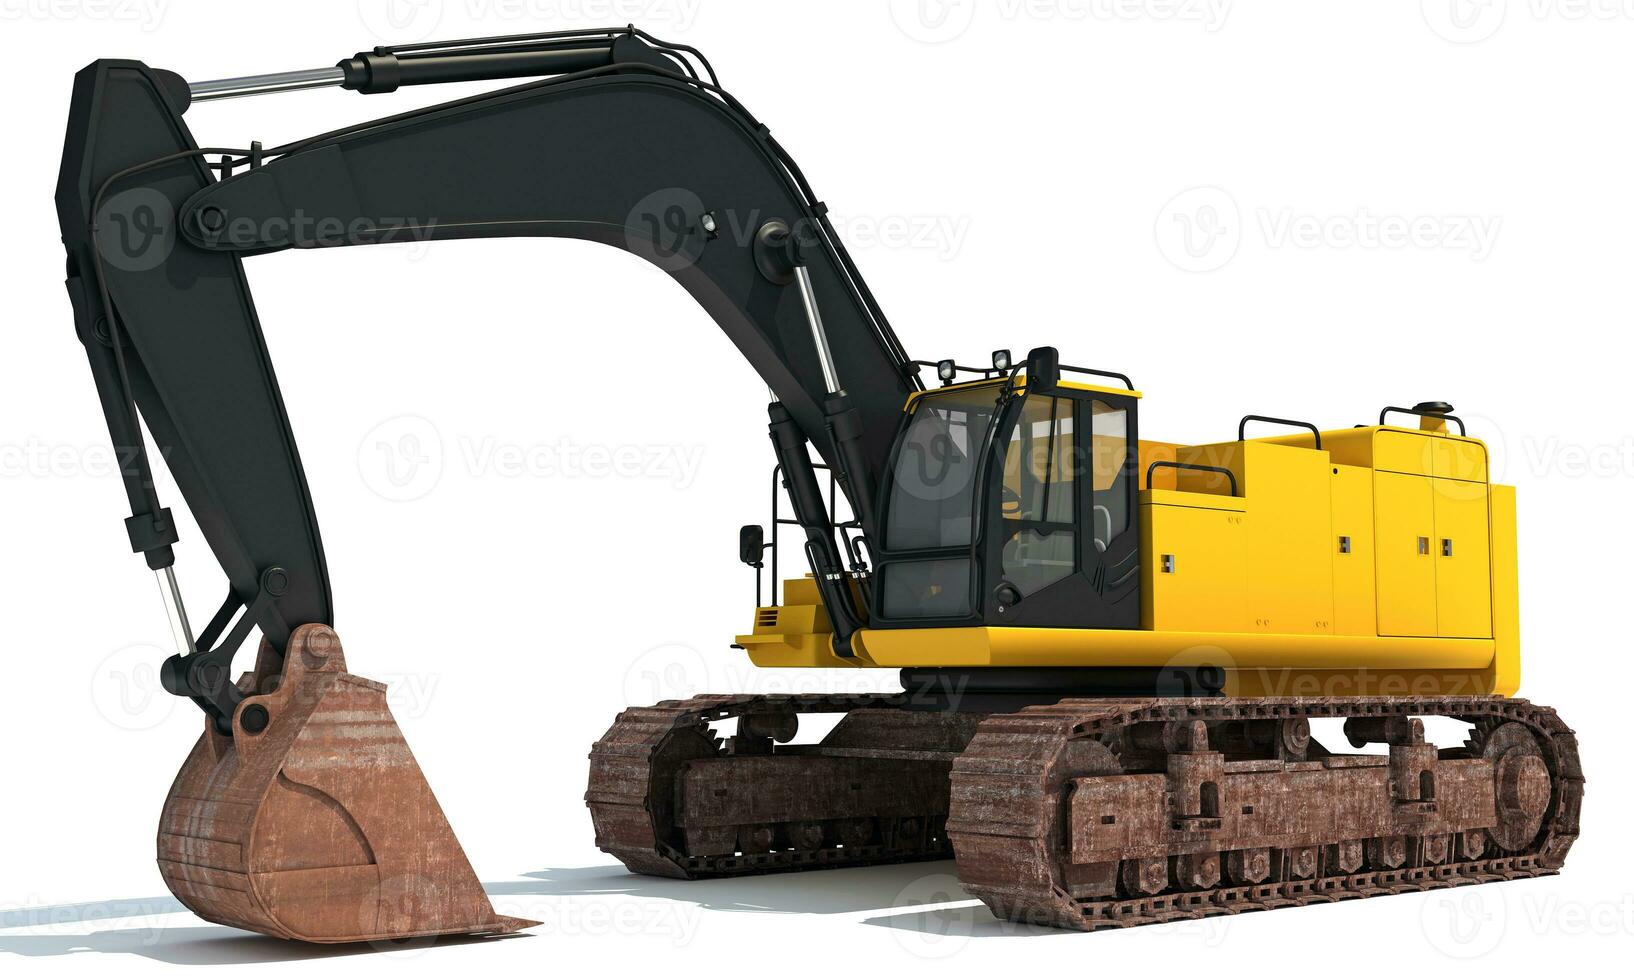 Excavator heavy construction machinery 3D rendering on white background photo